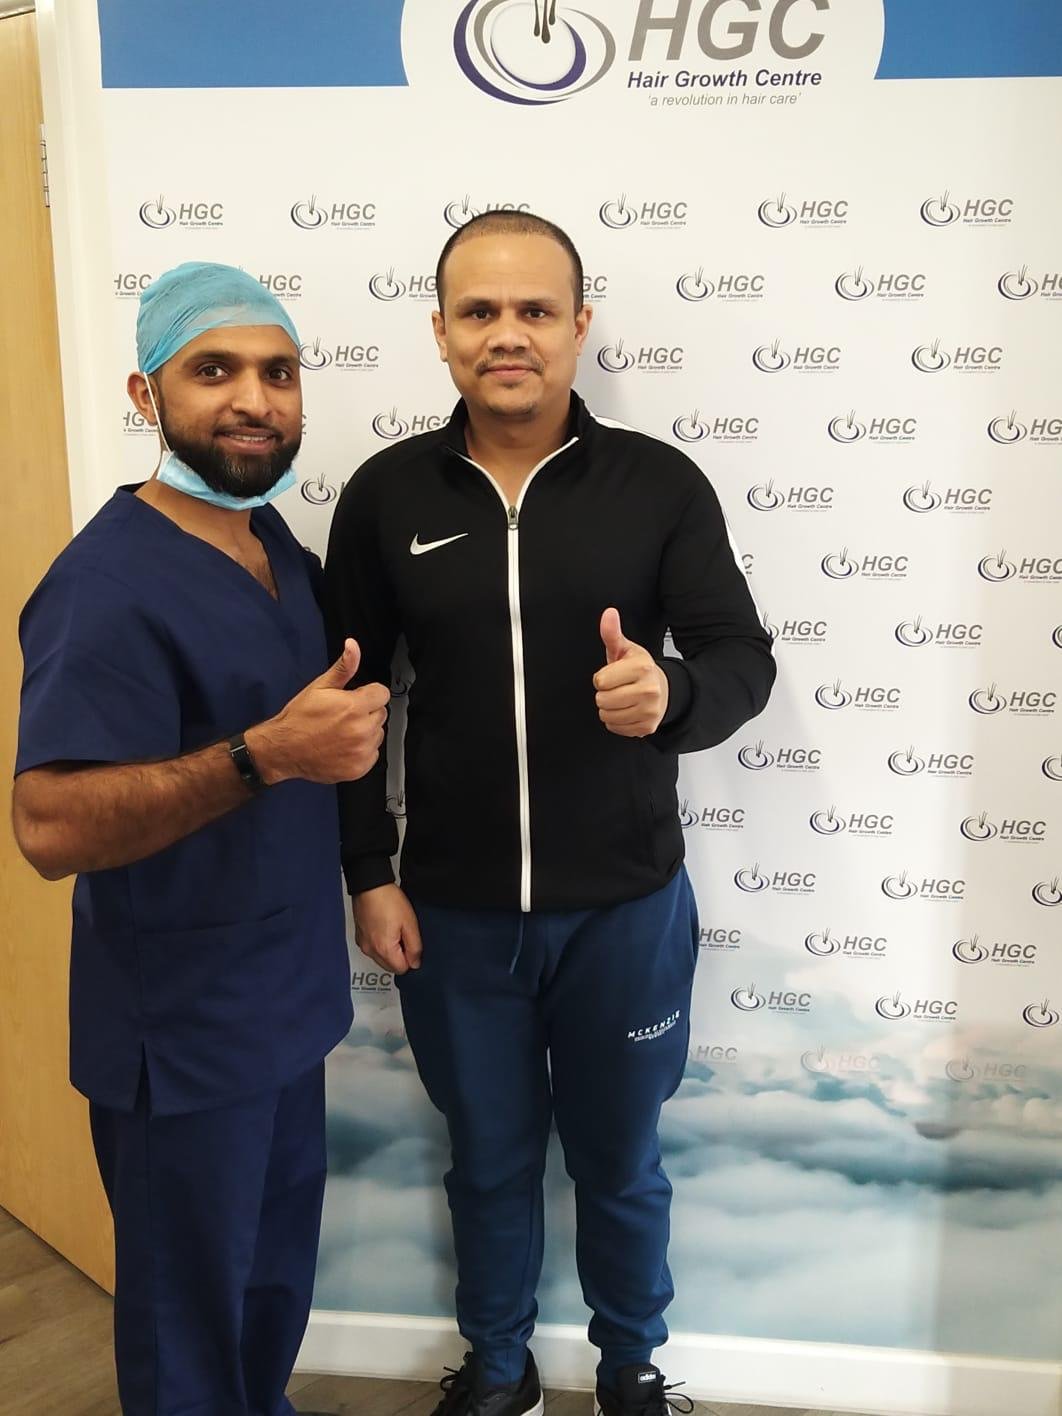 Hair Transplant in Manchester